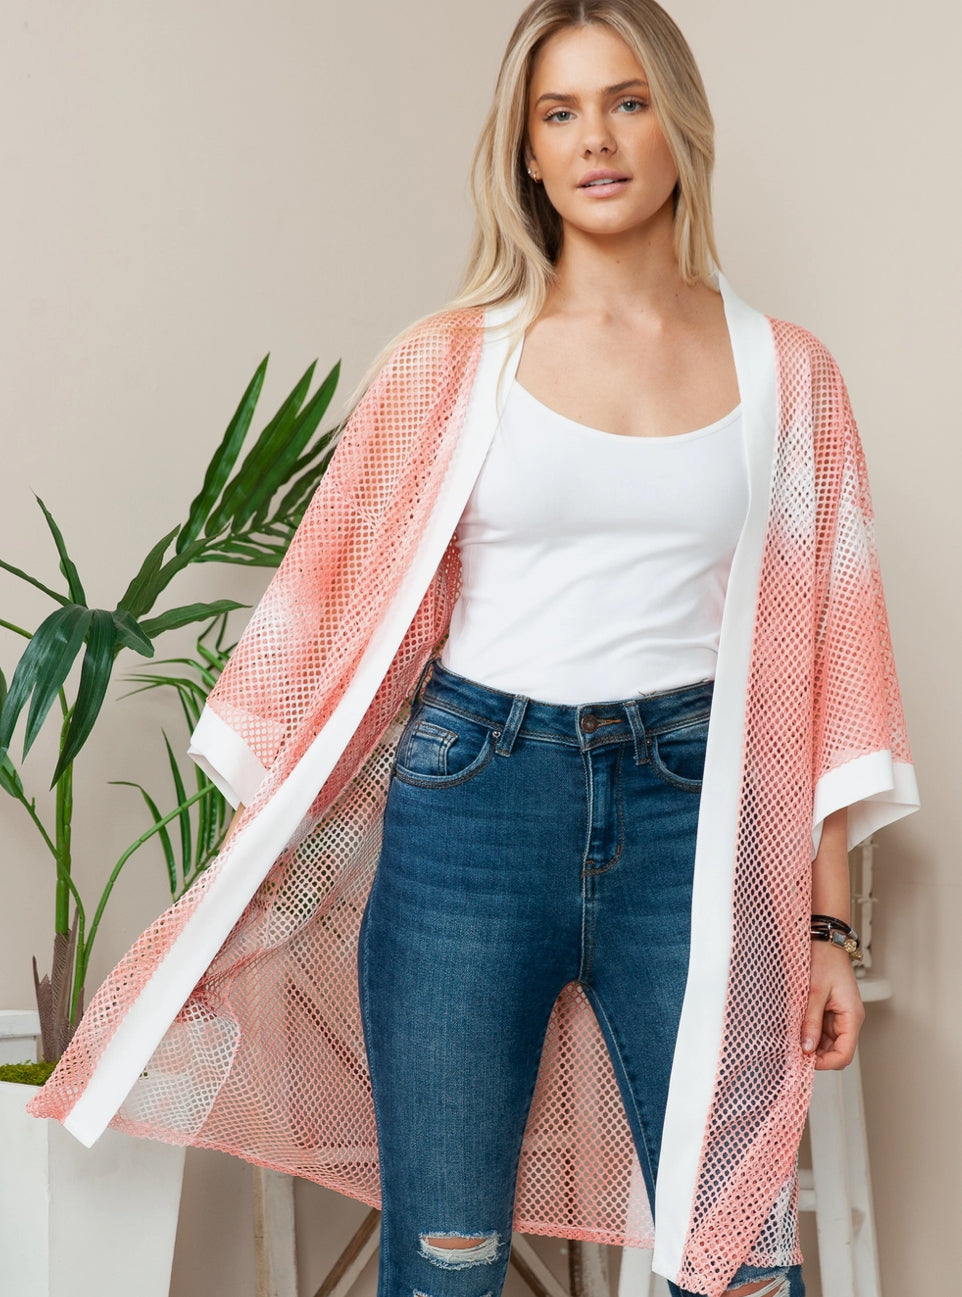 Seaside Vibes Beach Cover-Up